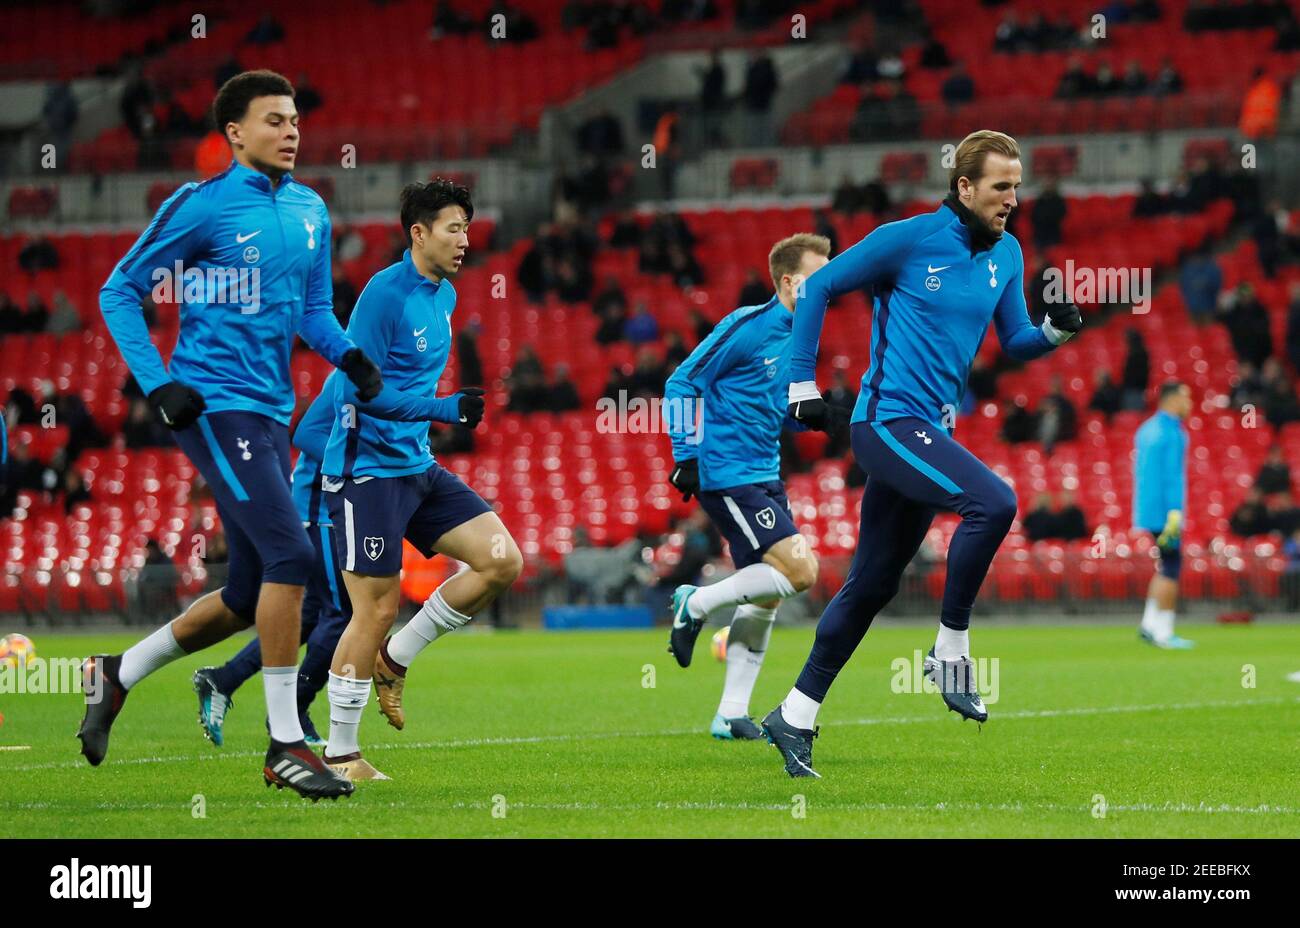 Soccer Football - Premier League - Tottenham Hotspur vs West Ham United - Wembley Stadium, London, Britain - January 4, 2018   Tottenham's Harry Kane, Son Heung-min and Dele Alli warm up before the match   REUTERS/Eddie Keogh    EDITORIAL USE ONLY. No use with unauthorized audio, video, data, fixture lists, club/league logos or 'live' services. Online in-match use limited to 75 images, no video emulation. No use in betting, games or single club/league/player publications.  Please contact your account representative for further details. Stock Photo